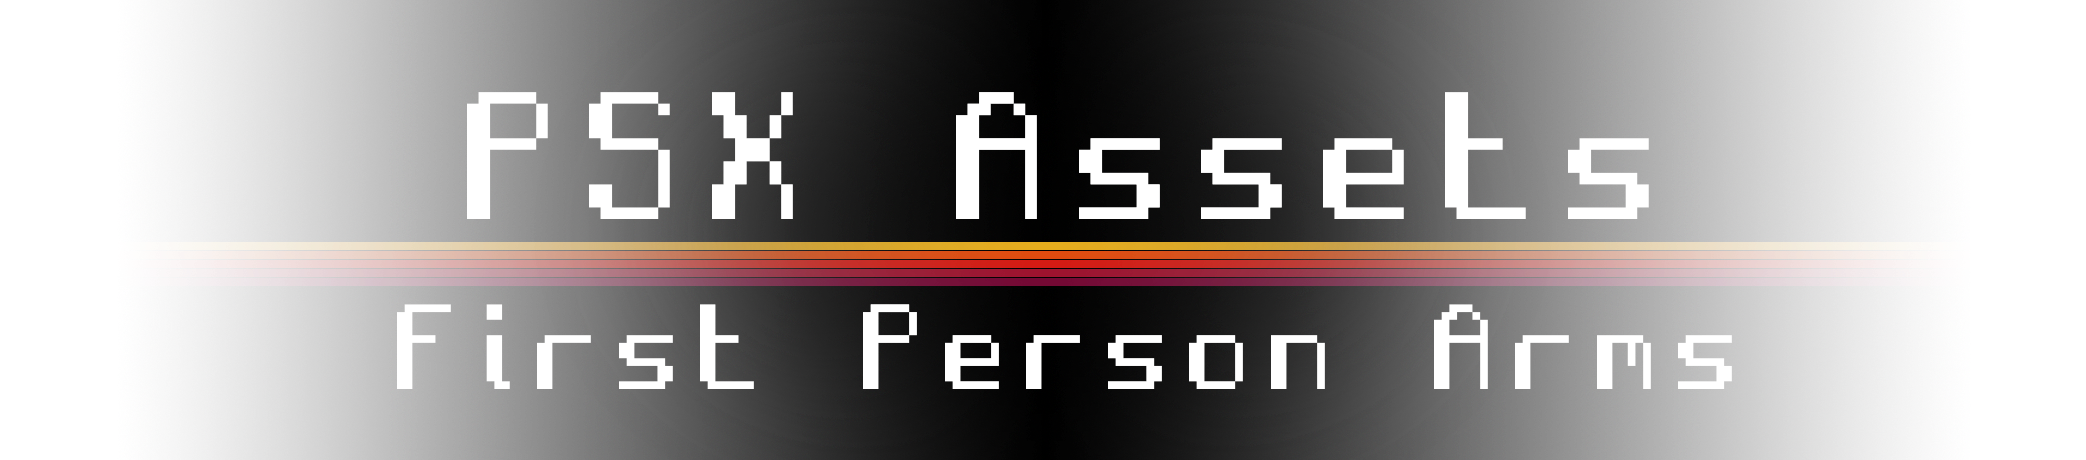 PSX Assets - First Person Arms